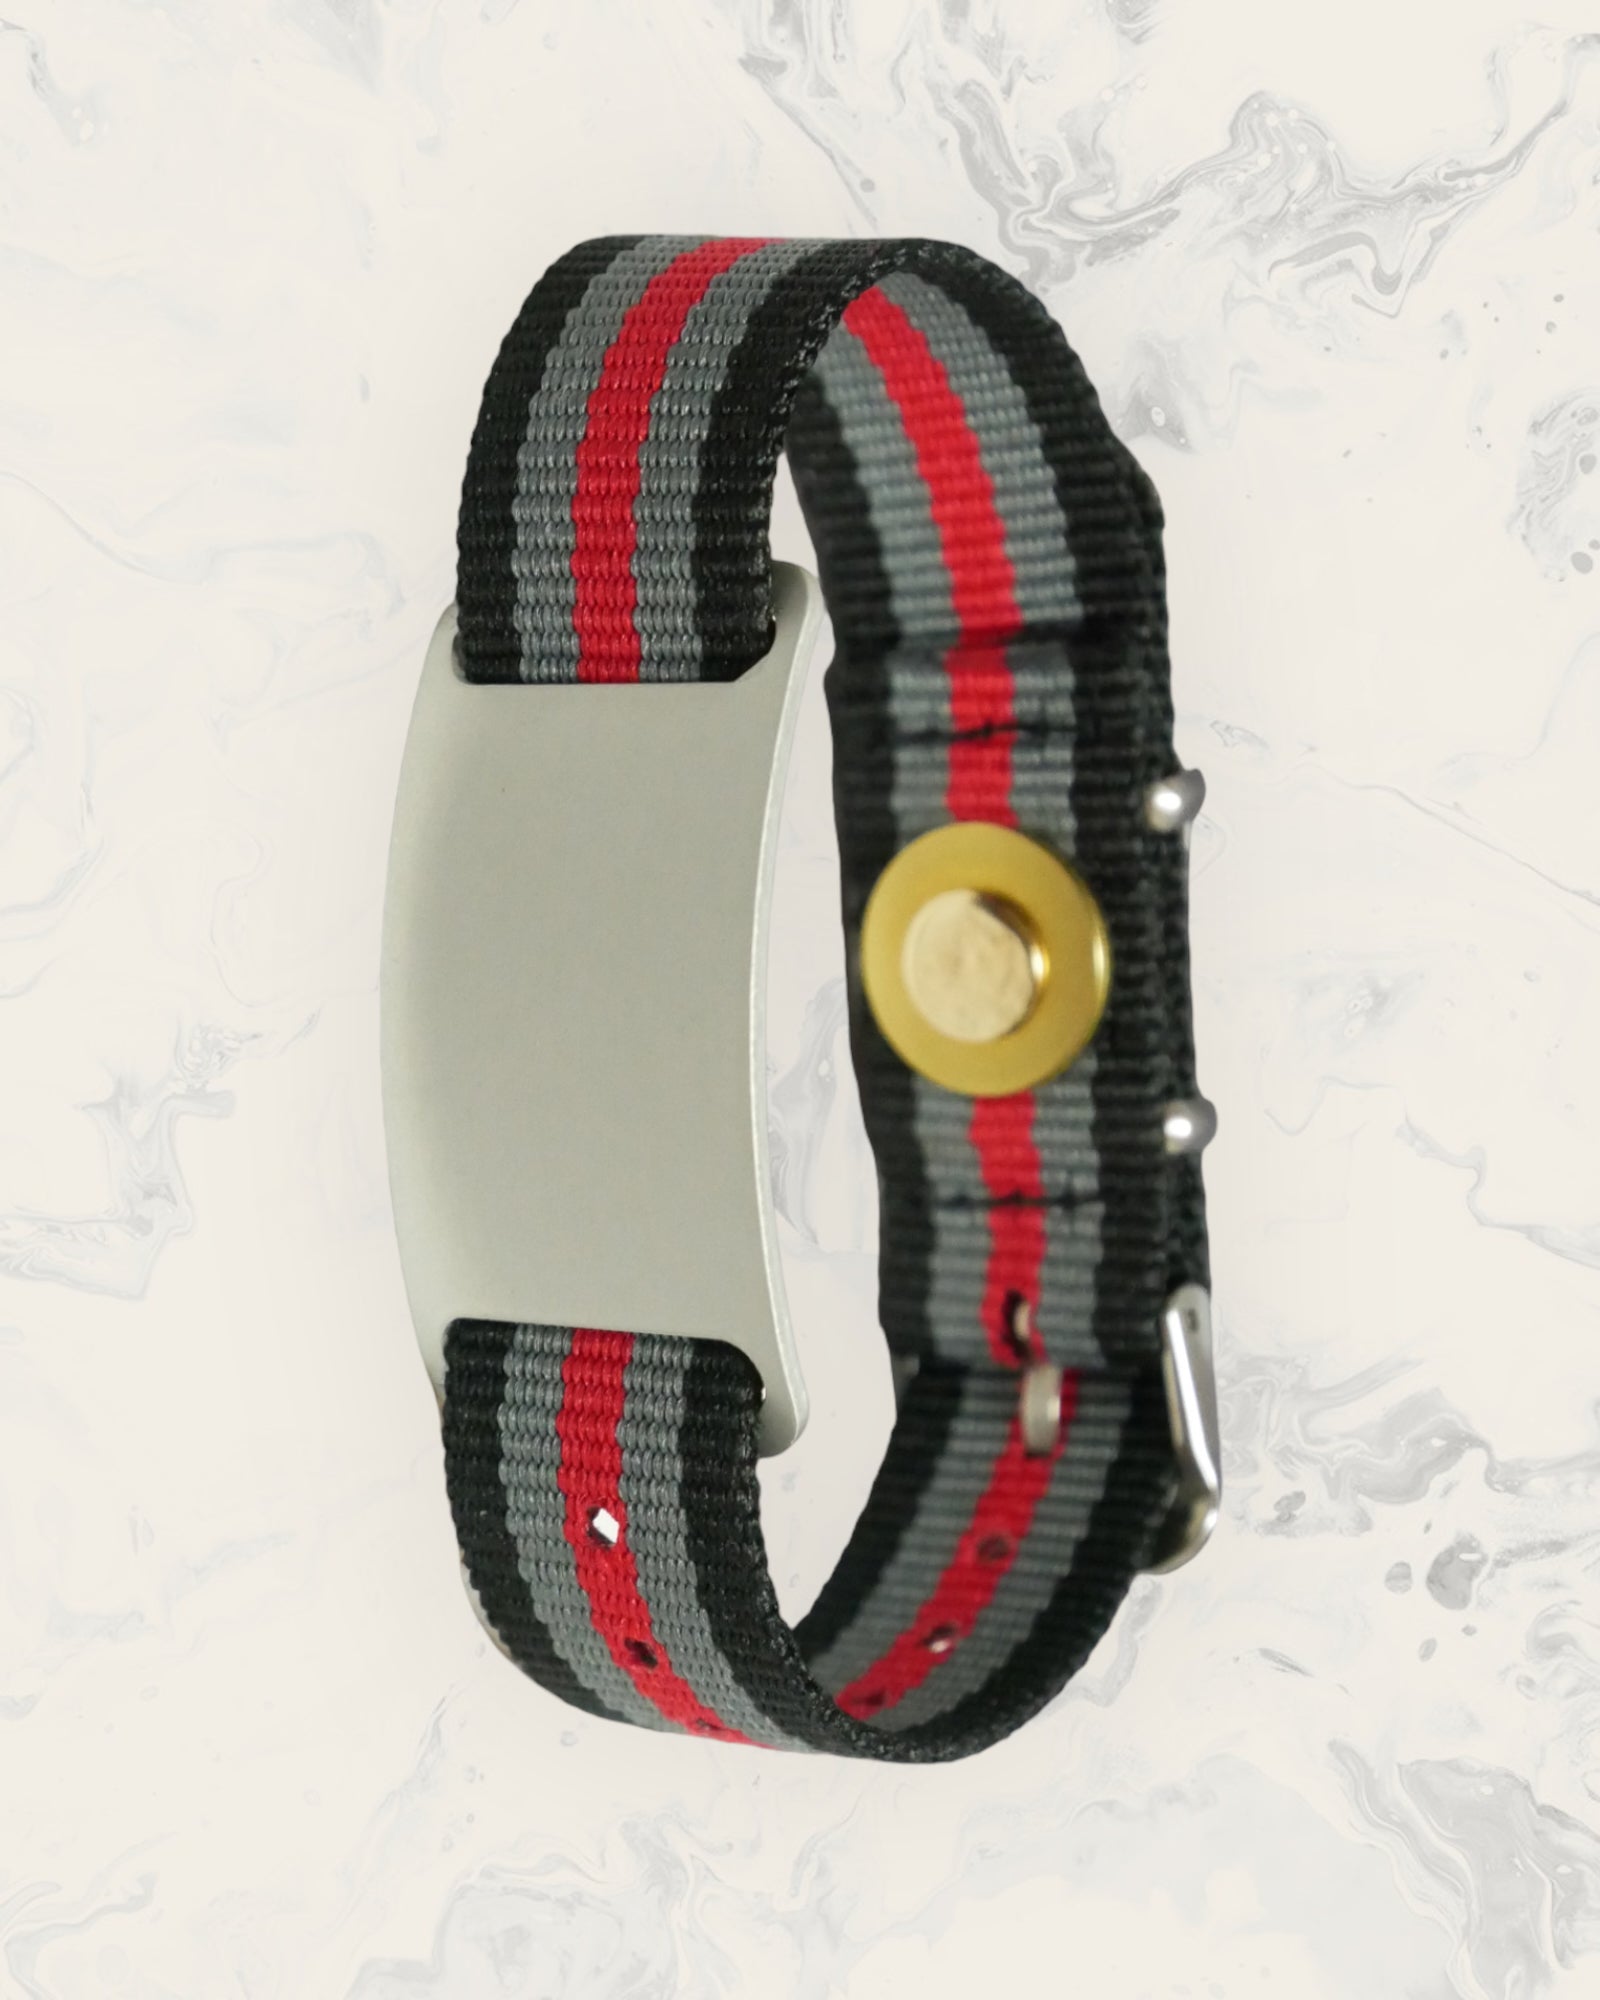 Natural Pain Relief and EMF Protection Bracelet Nylon Band Color Black, Gray, and Red Striped with a Silver Slider